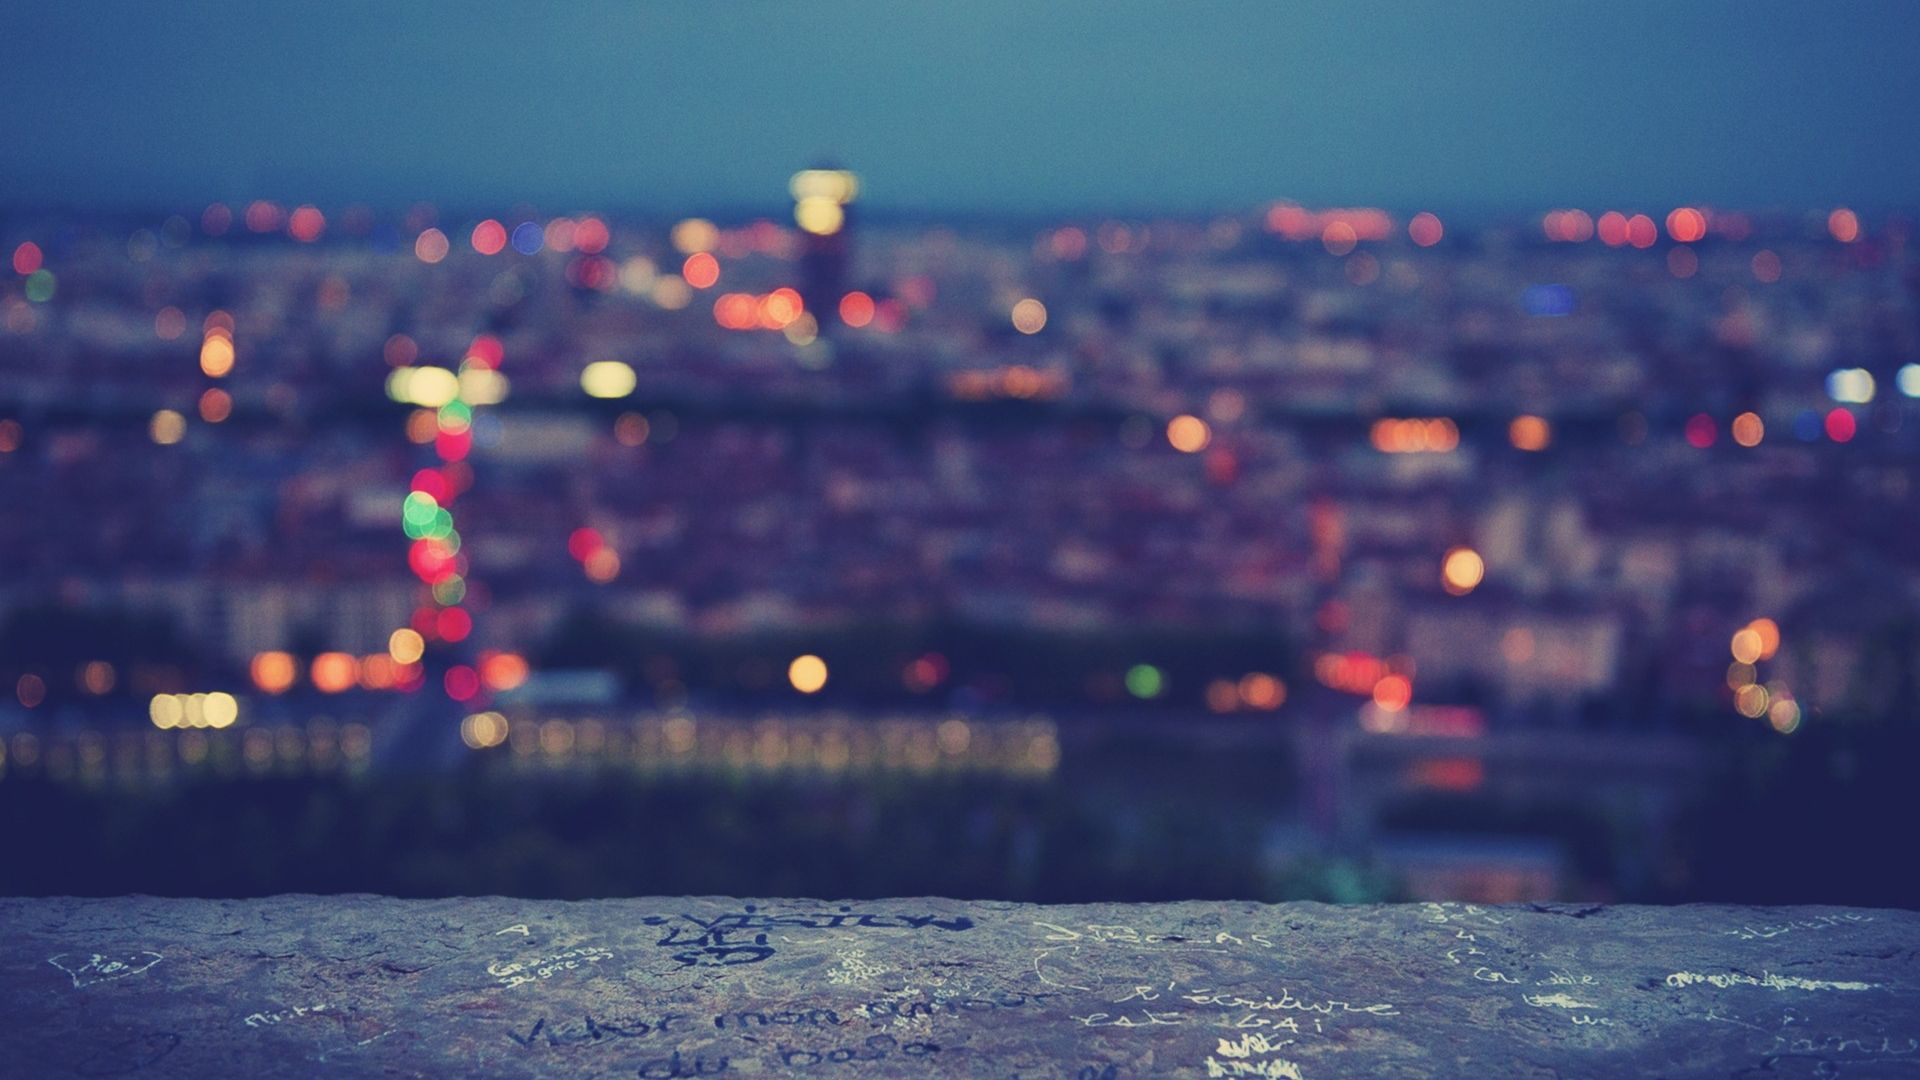 Free download Blurred City Lights Background Tumblr Blurred City Lights Cover [1920x1200] for your Desktop, Mobile & Tablet. Explore City Lights Background. City Lights at Night Wallpaper, City Light Wallpaper